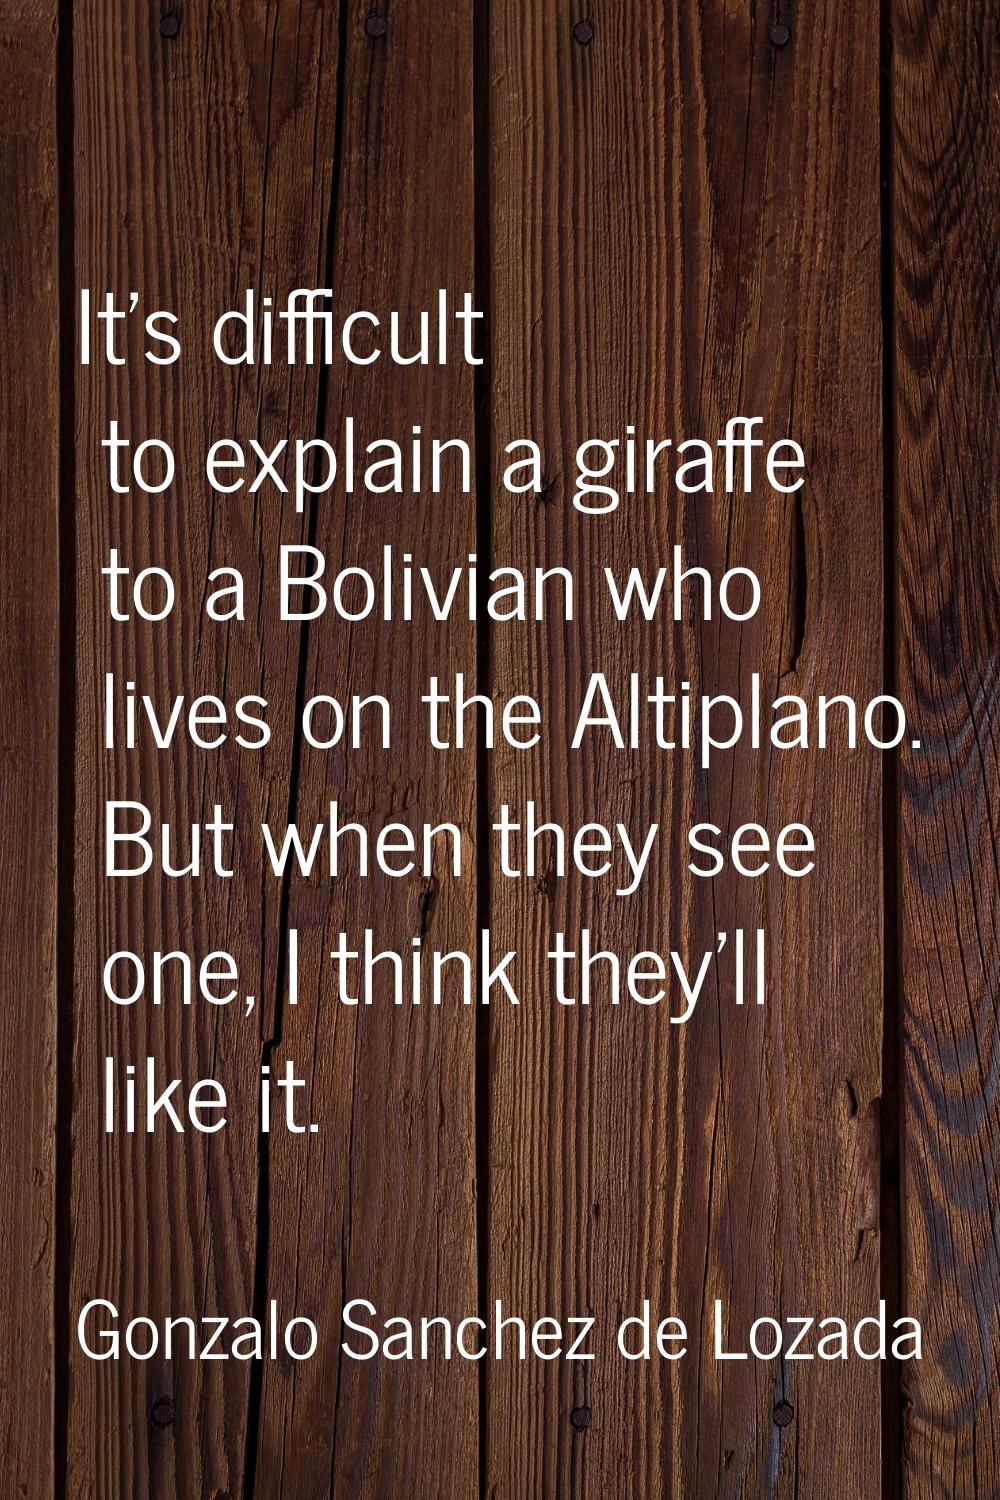 It's difficult to explain a giraffe to a Bolivian who lives on the Altiplano. But when they see one